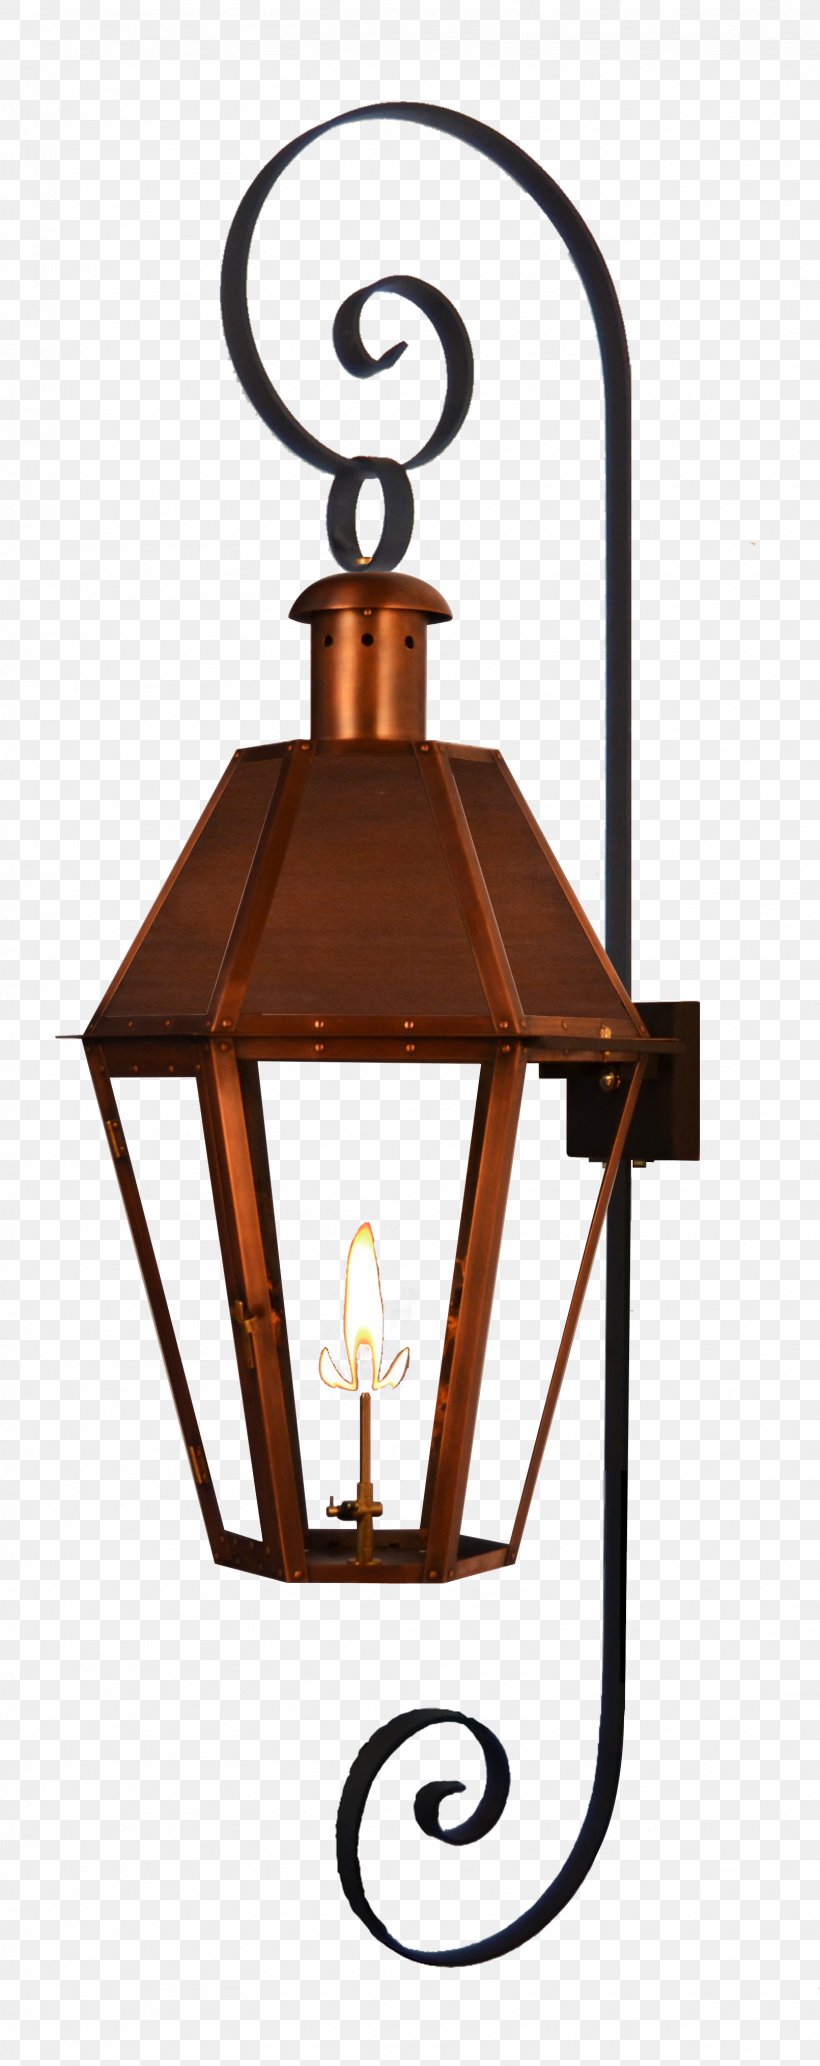 Lantern Gas Lighting Landscape Lighting Light Fixture, PNG, 1611x4059px, Lantern, Candle Holder, Ceiling, Ceiling Fixture, Coppersmith Download Free